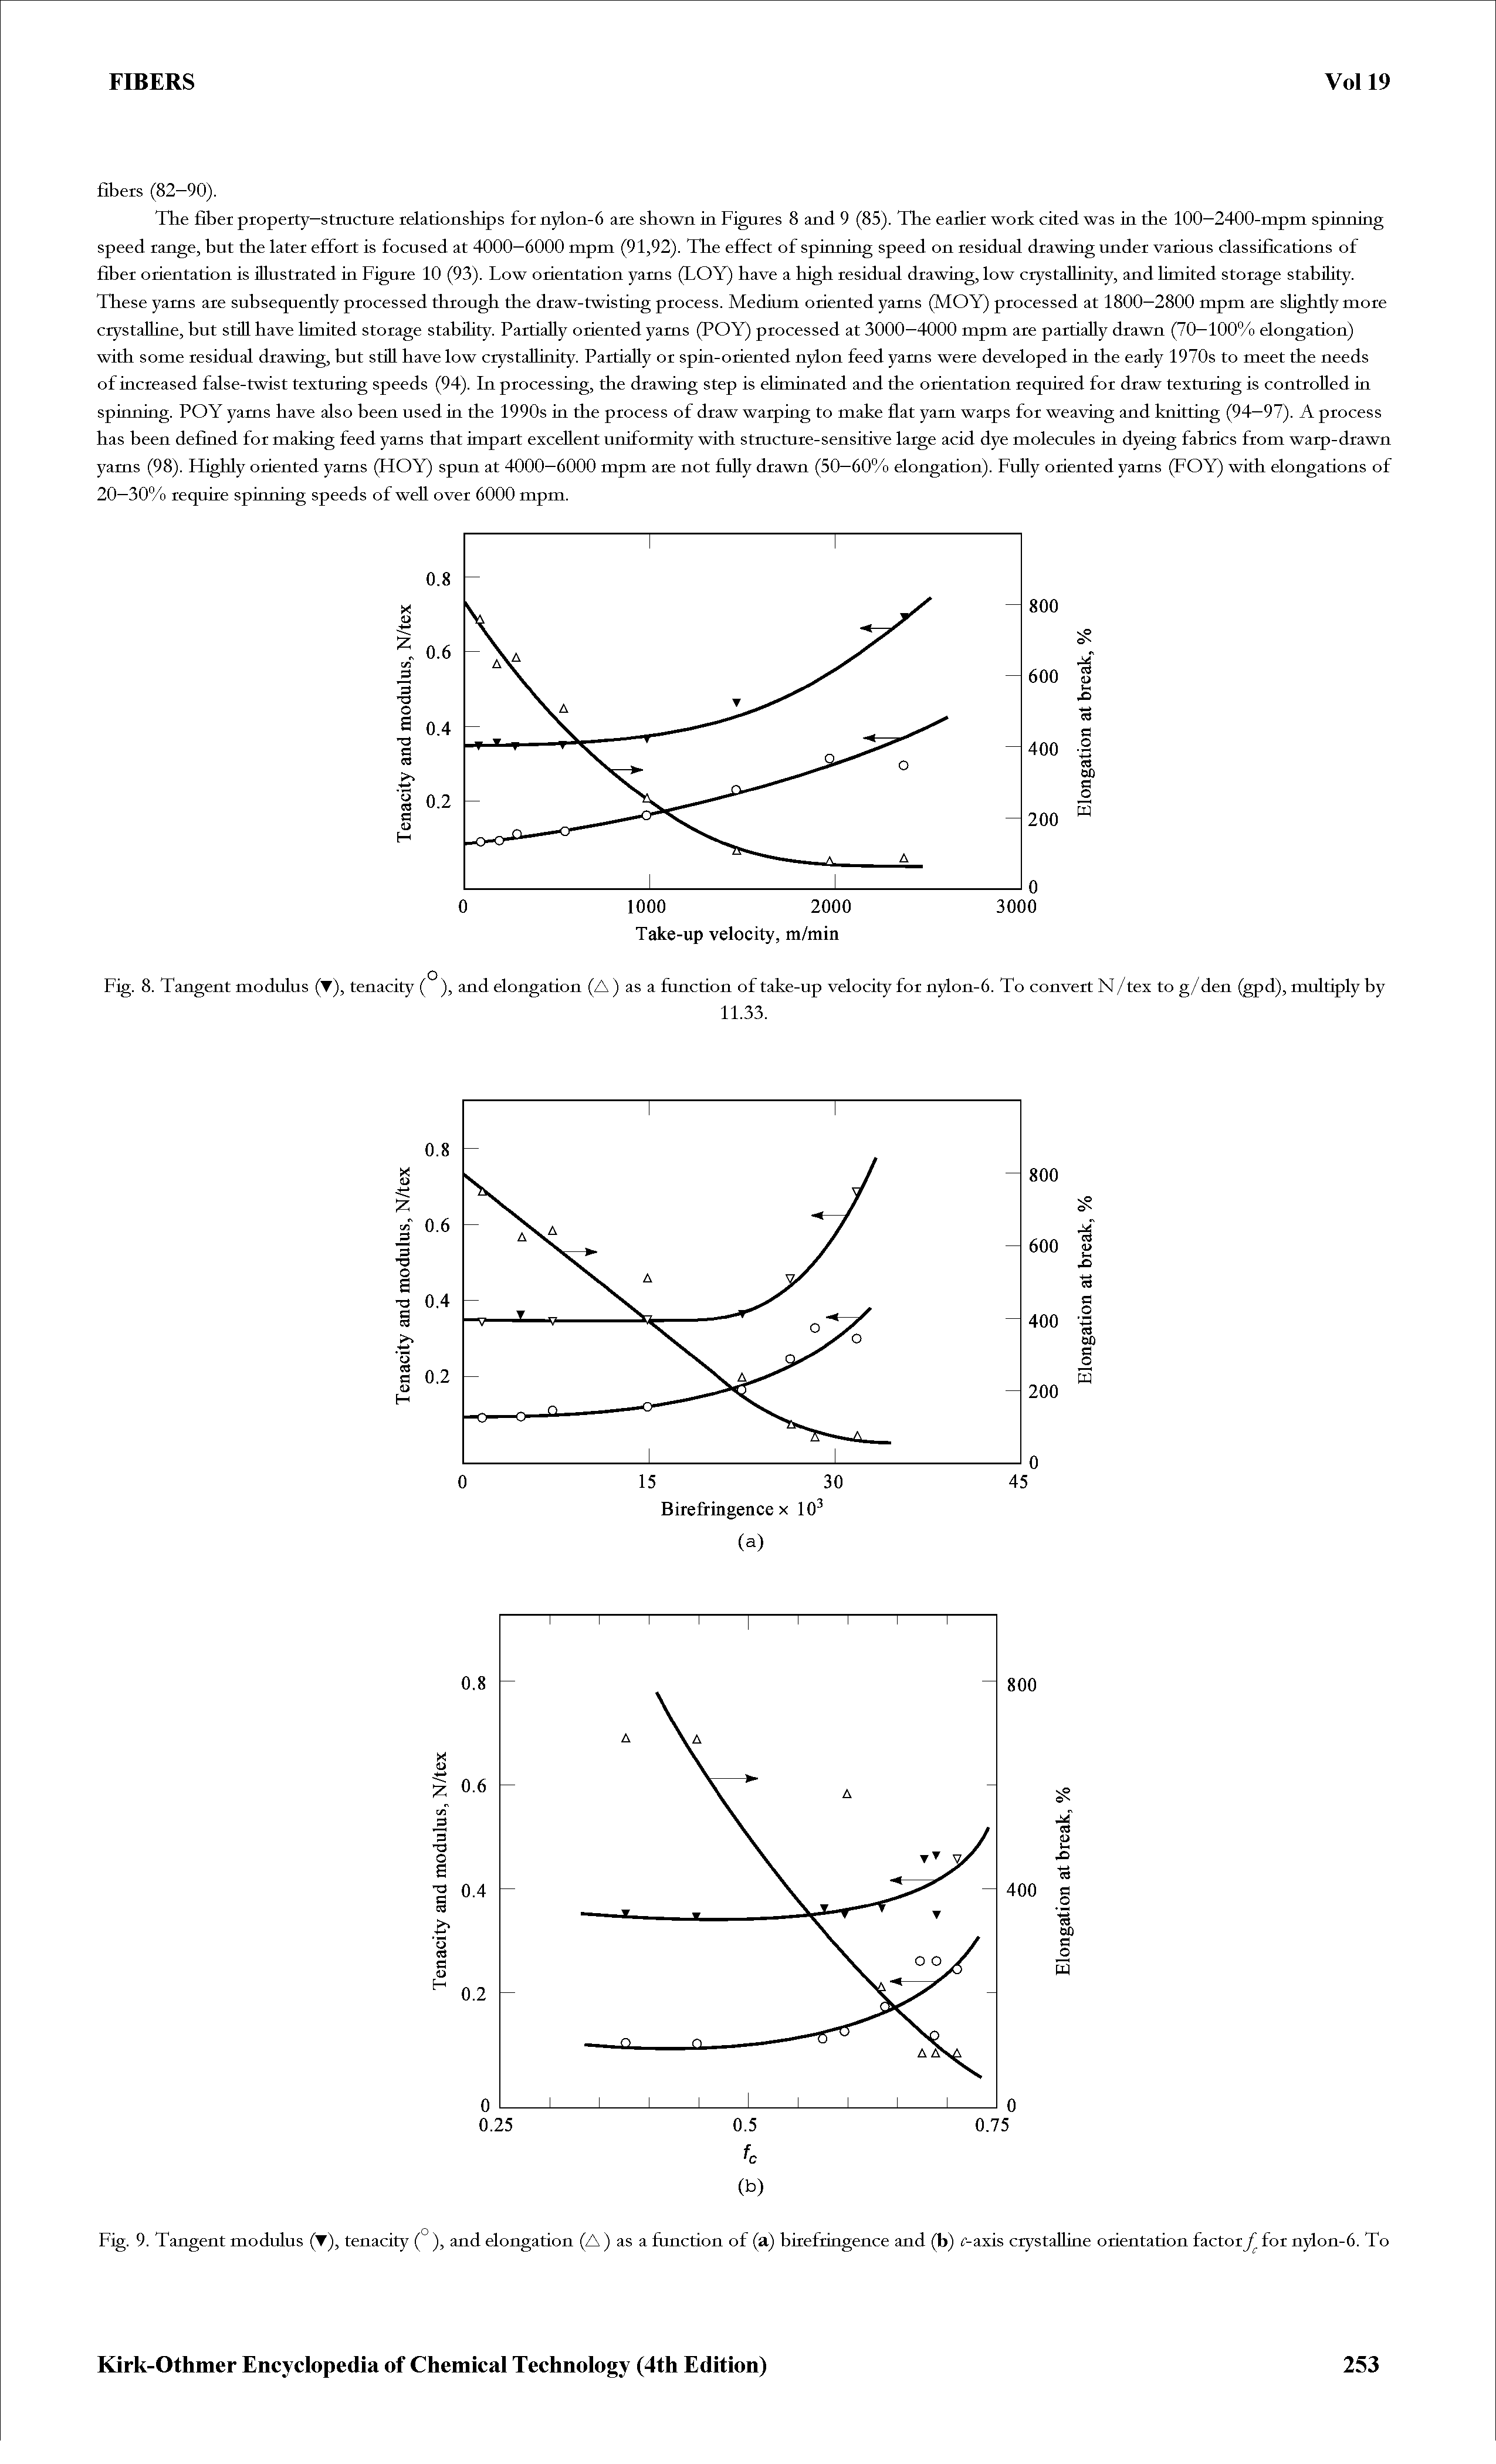 Fig. 8. Tangent modulus (T), tenacity ( ), and elongation (A ) as a function of take-up velocity for nylon-6. To convert N /tex to g/den (gpd), multiply by...